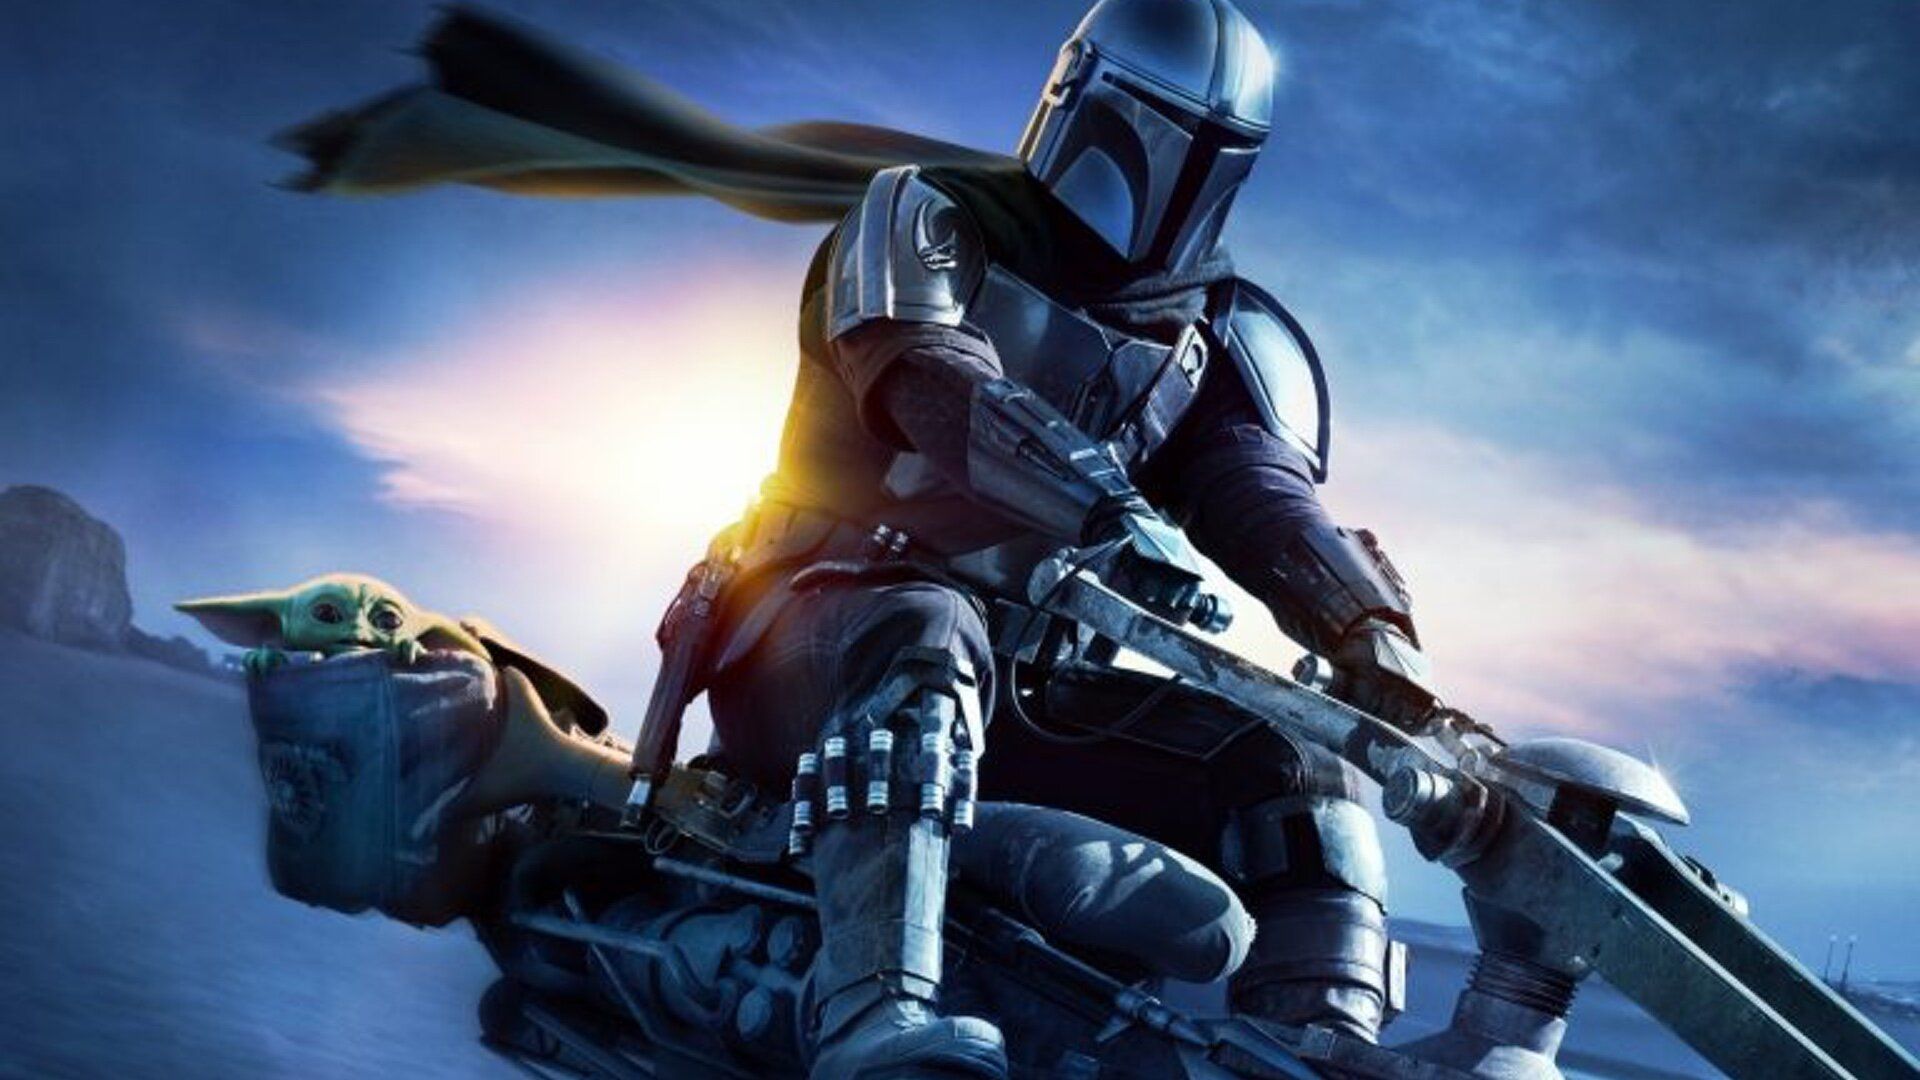 Baby Yoda Takes a Ride on a Speeder Bike in New Poster for THE MANDALORIAN Season 2